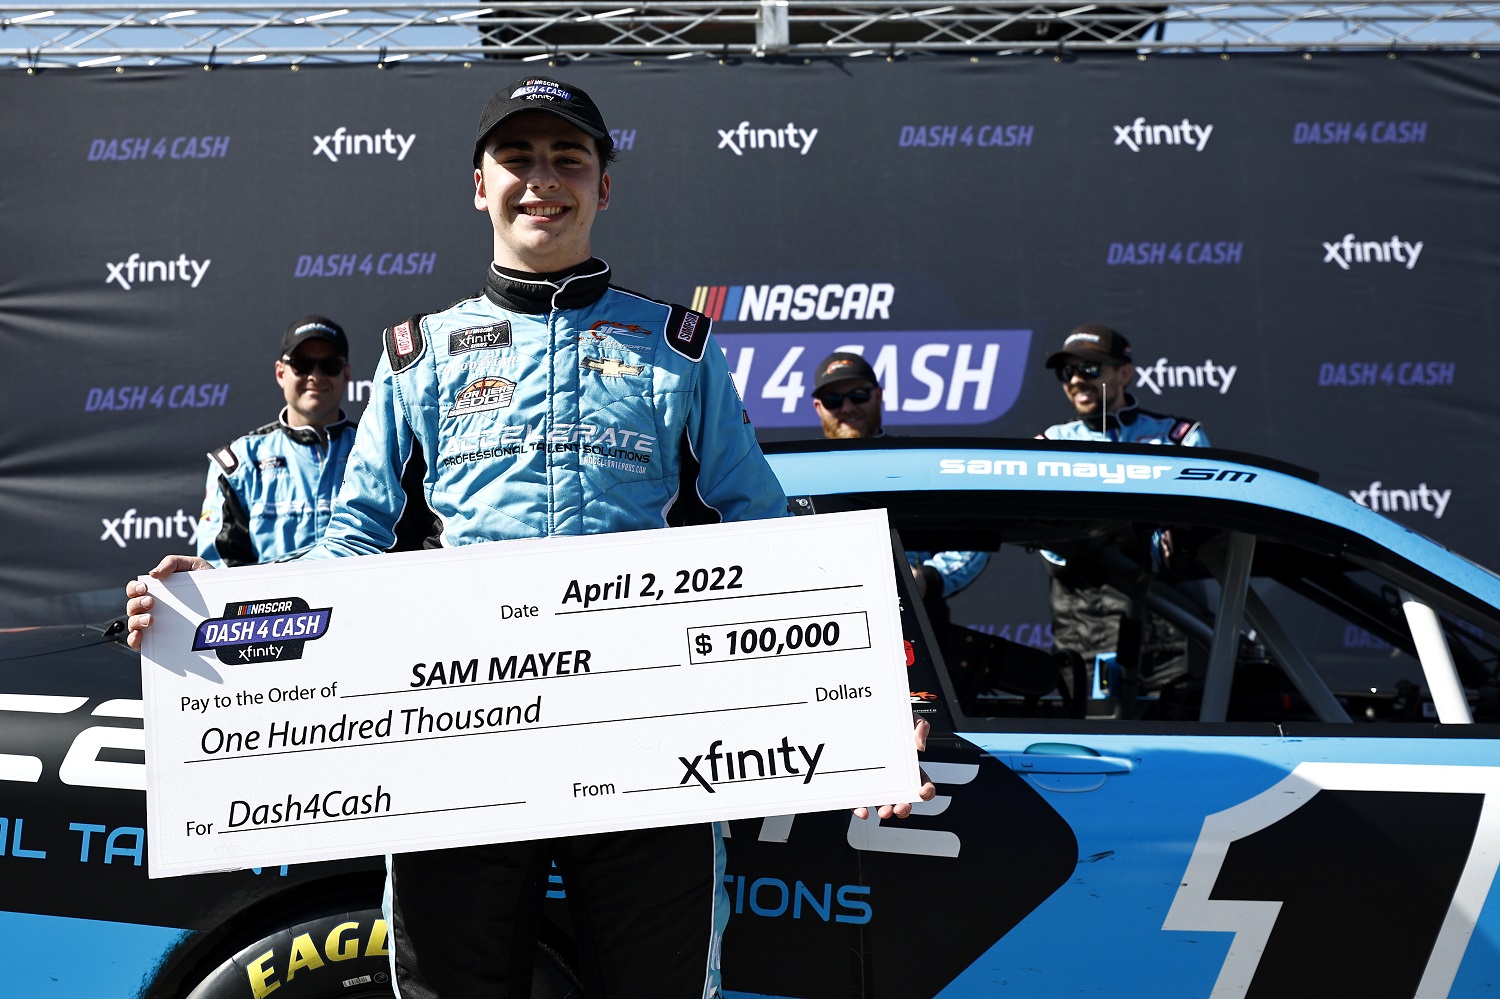 Sam Mayer poses with the Dash 4 Cash check after the NASCAR Xfinity Series ToyotaCare 250 at Richmond Raceway on April 2, 2022.